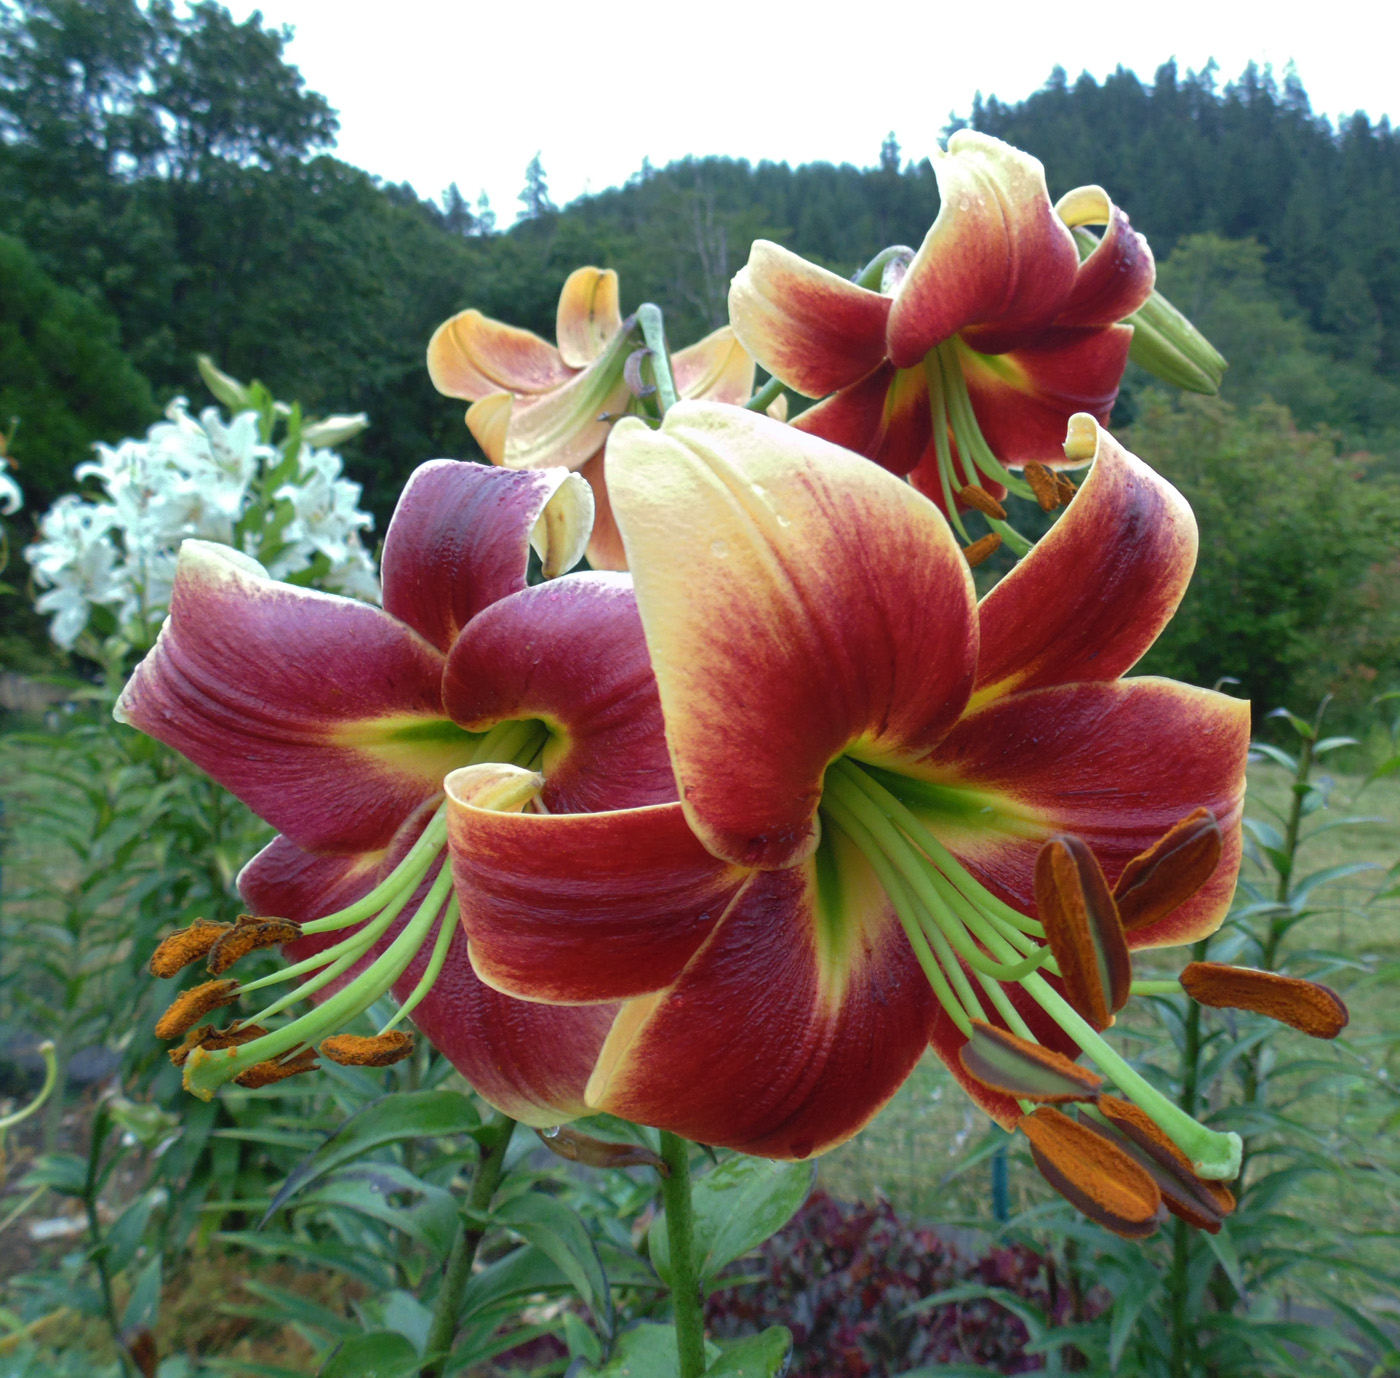 Red Morning' - Orienpet Hybrid Lily Bulb - 'A Spring Clearance Sale'